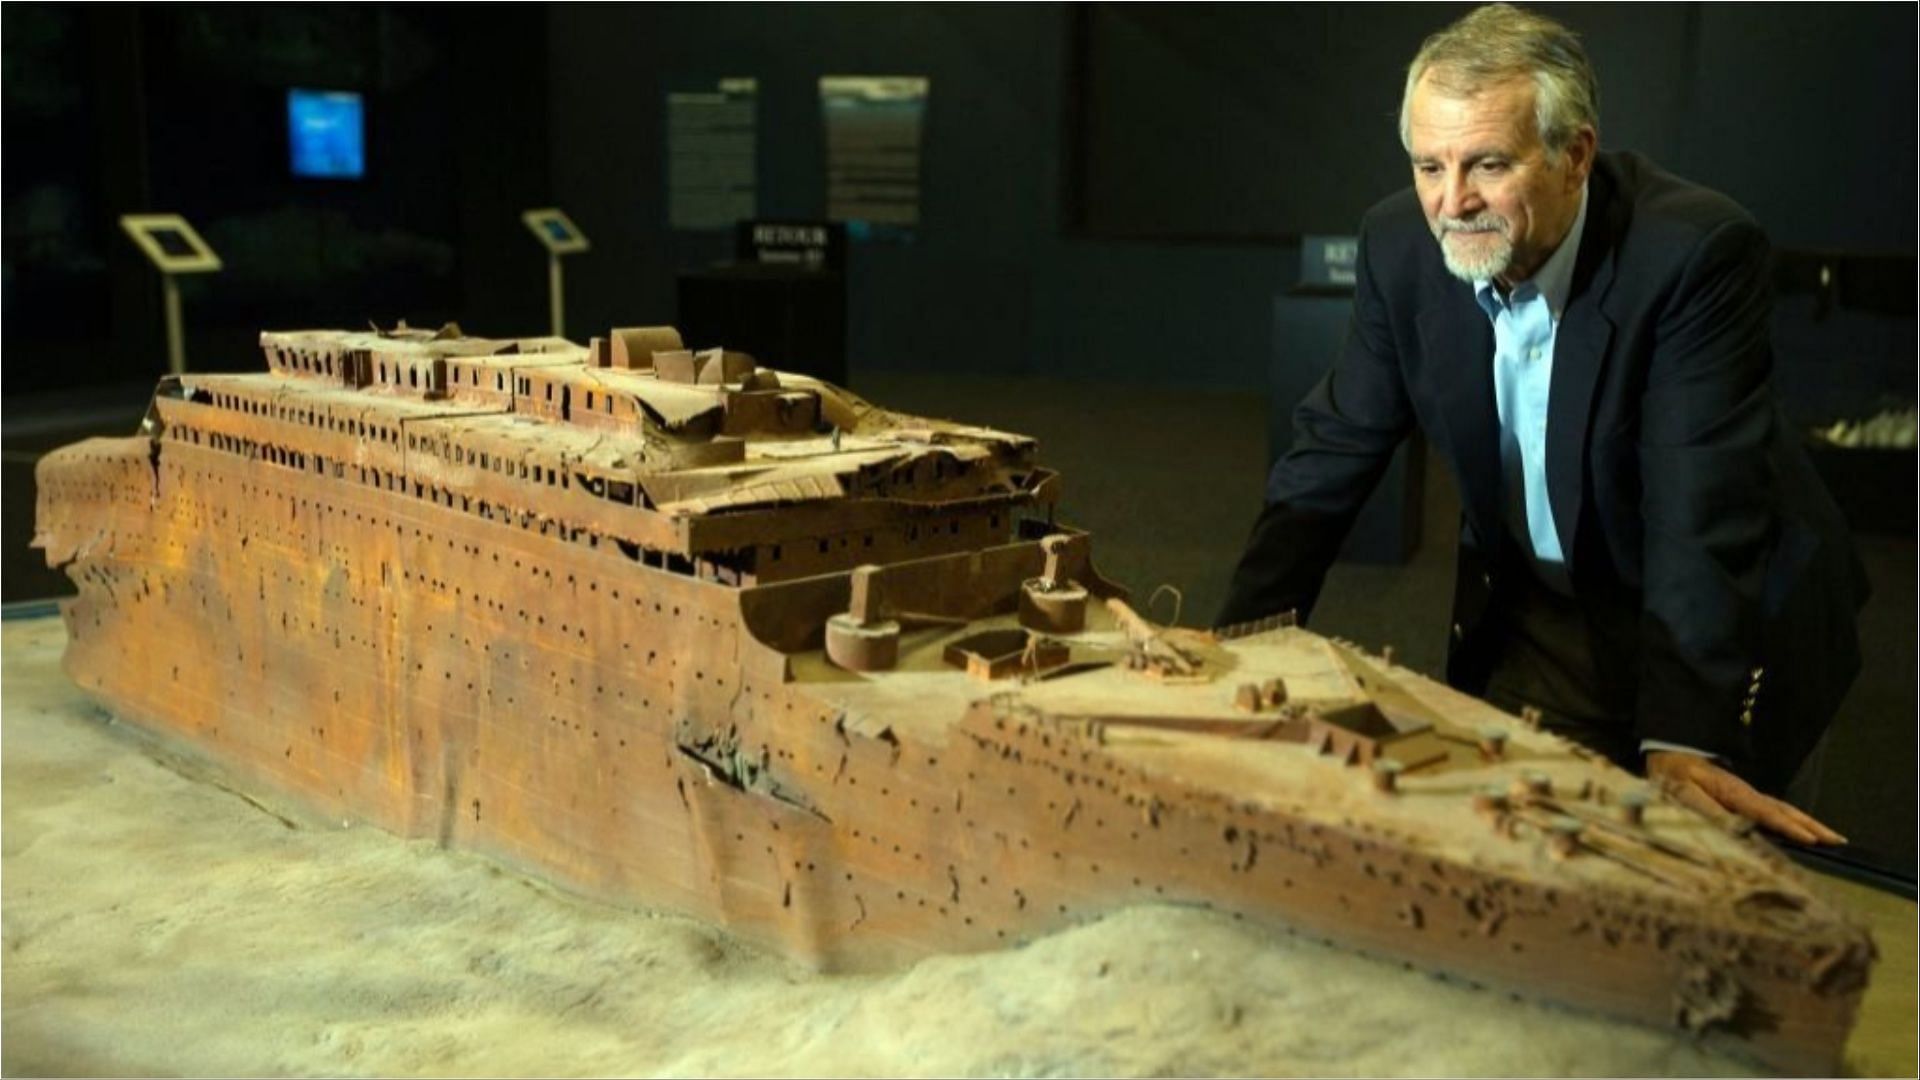 Paul-Henri Nargeolet recovered a lot of artefacts of the RMS Titanic (Image via Joel Saget/Getty Images)